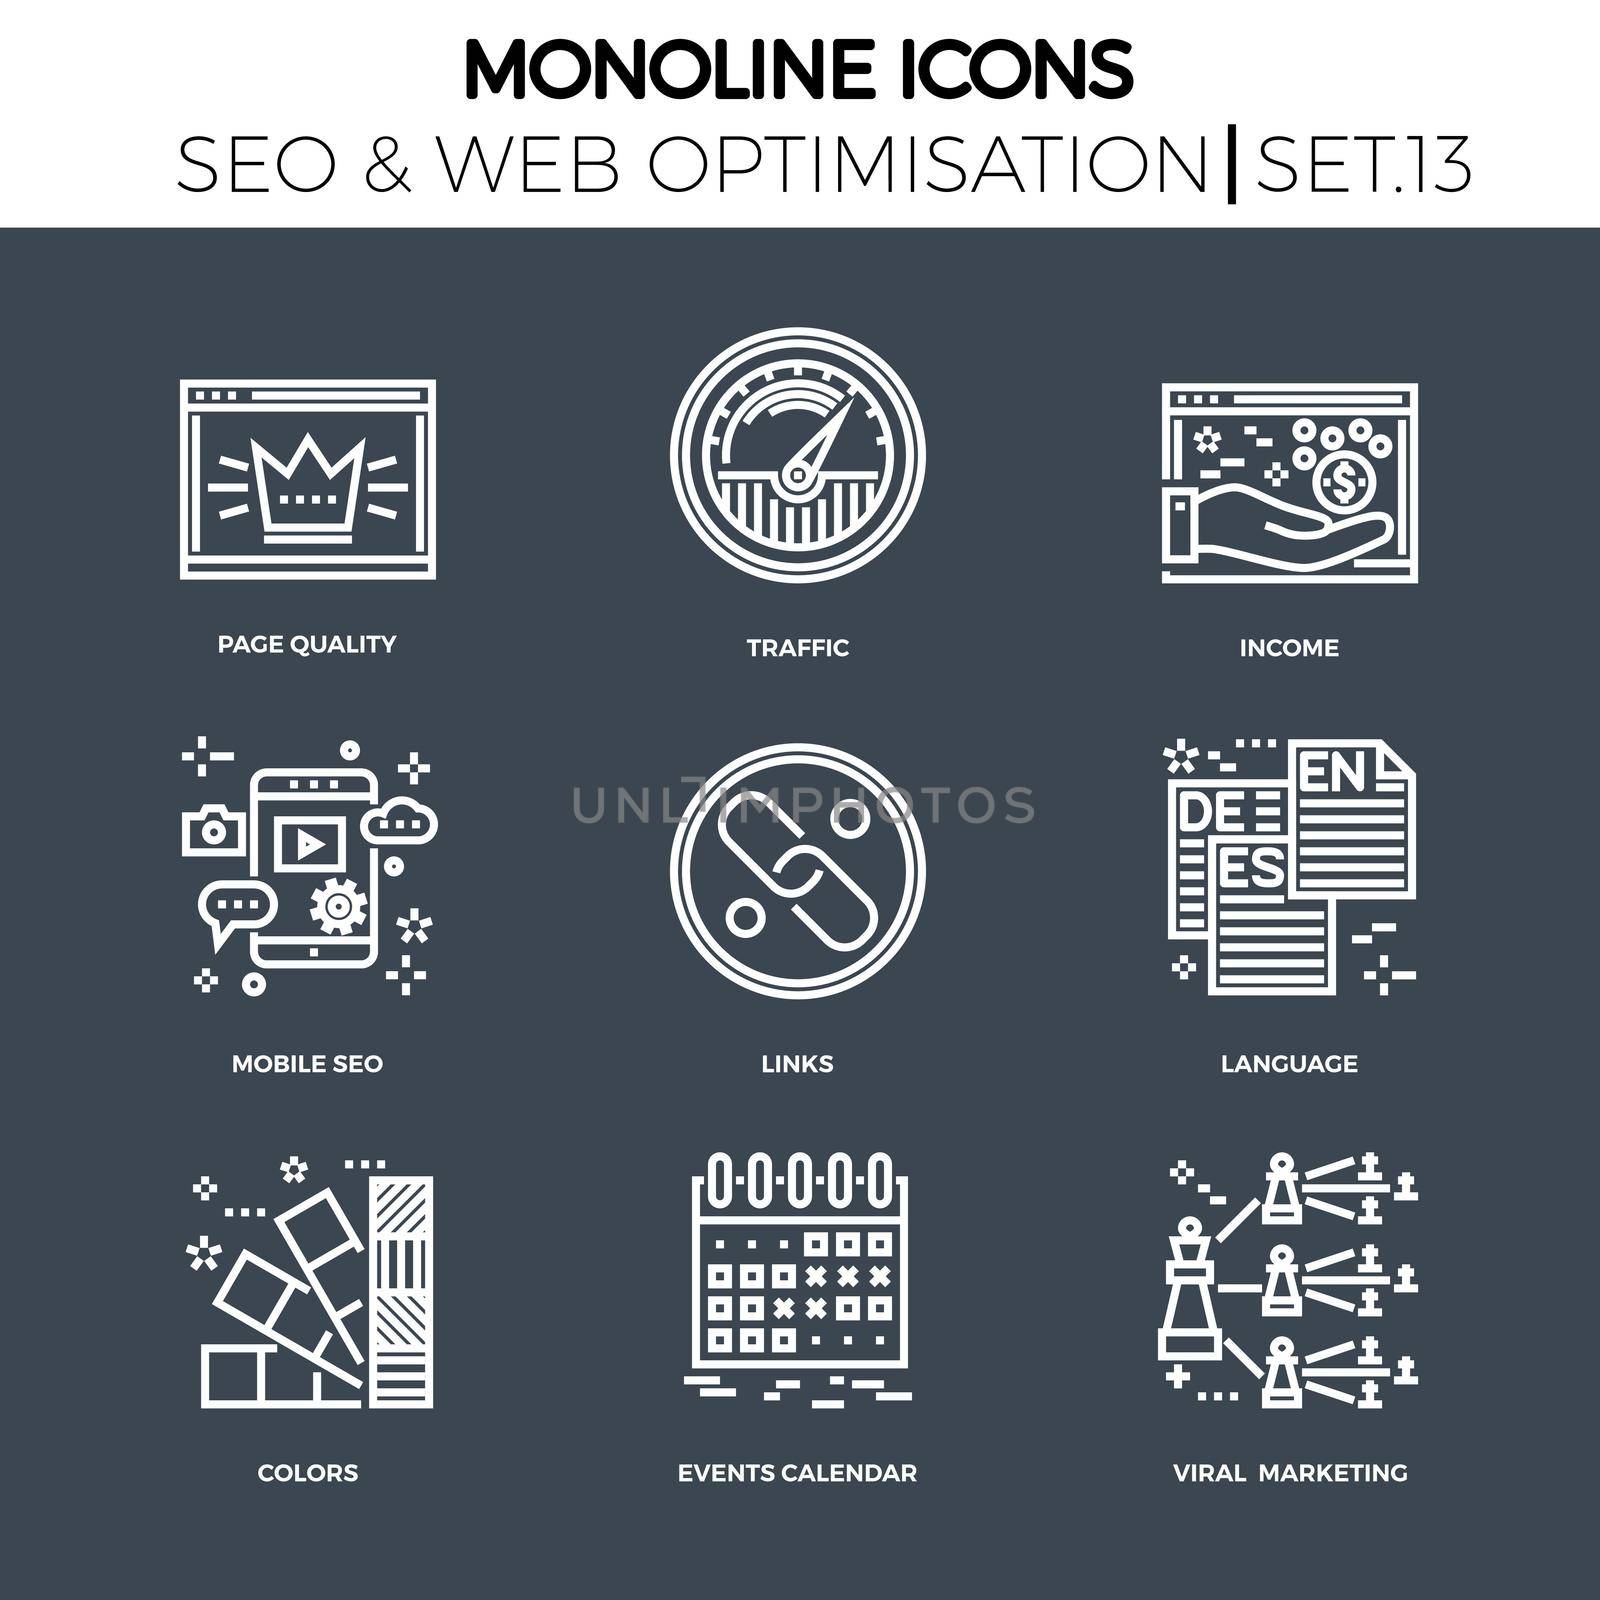 Line icons set with flat design of search engine optimization. Page quality, traffic, income, mobile seo, links, language, colors, events calendar, viral marketing. Monoline icons